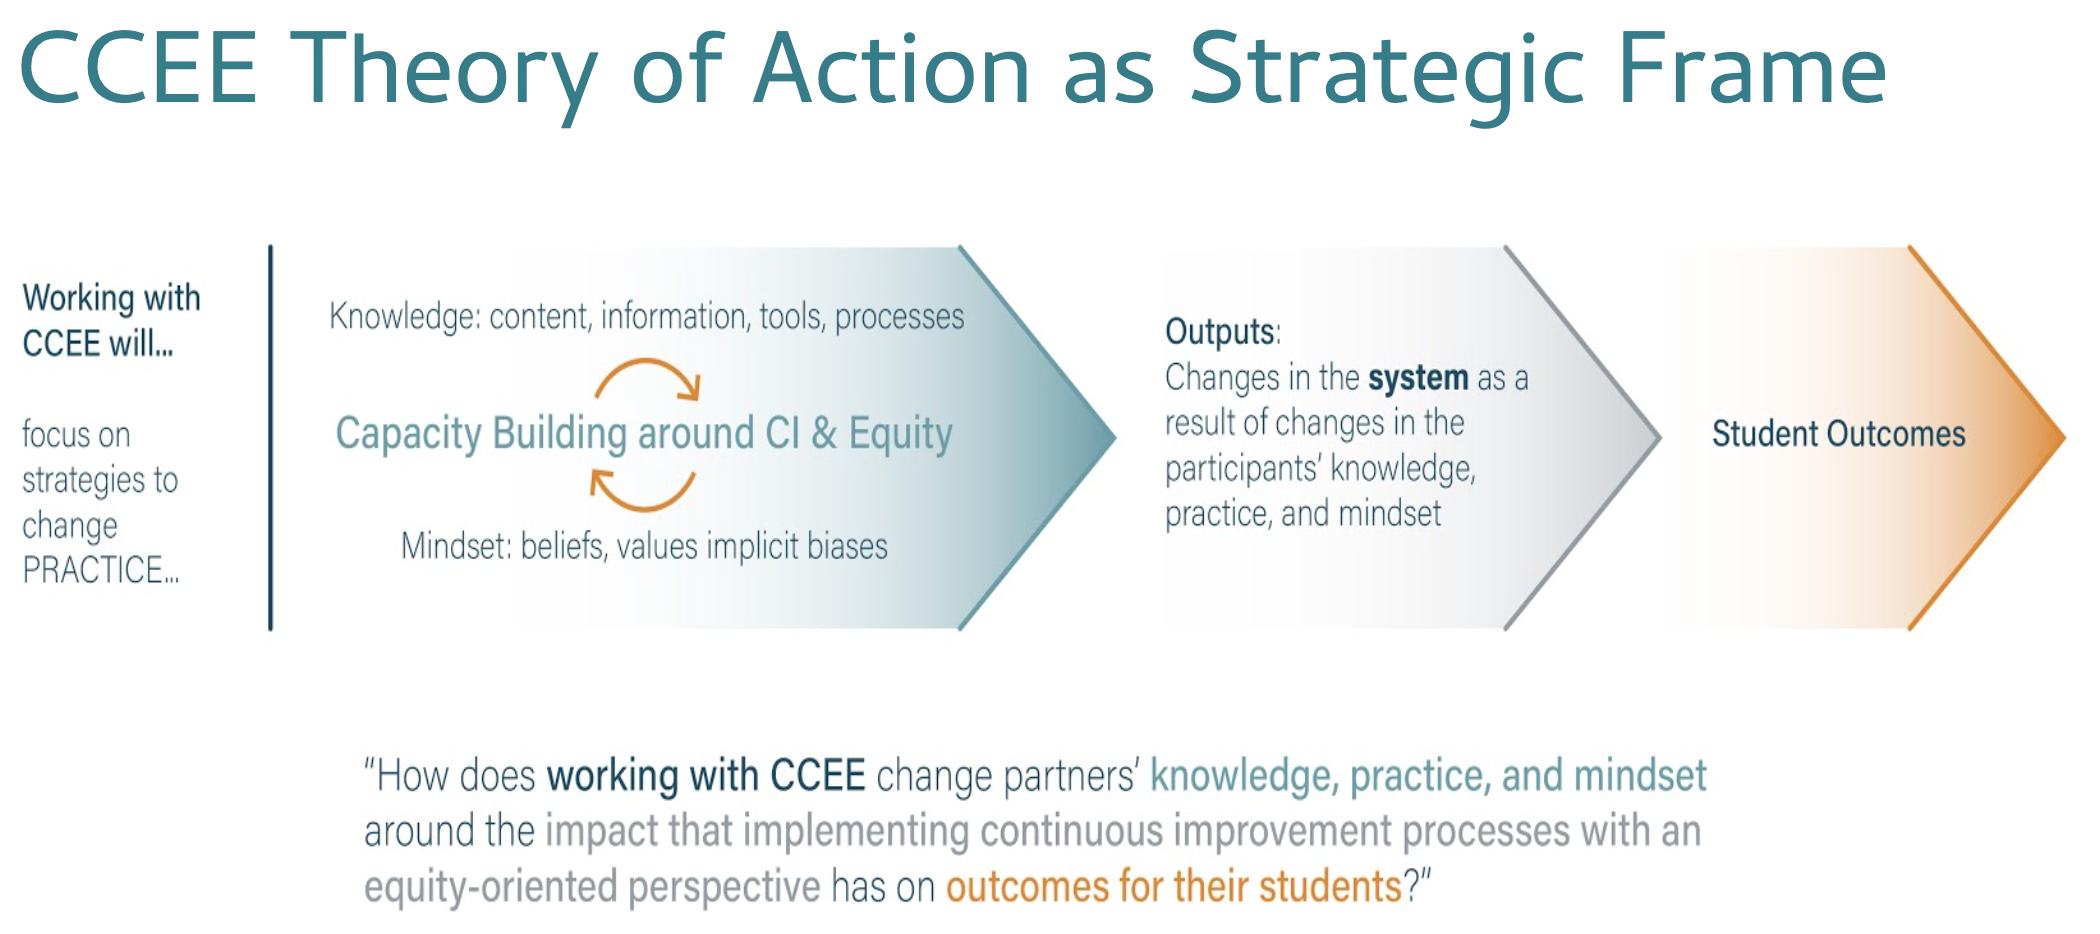 CCEE Theory of Action as Strategic Frame 2